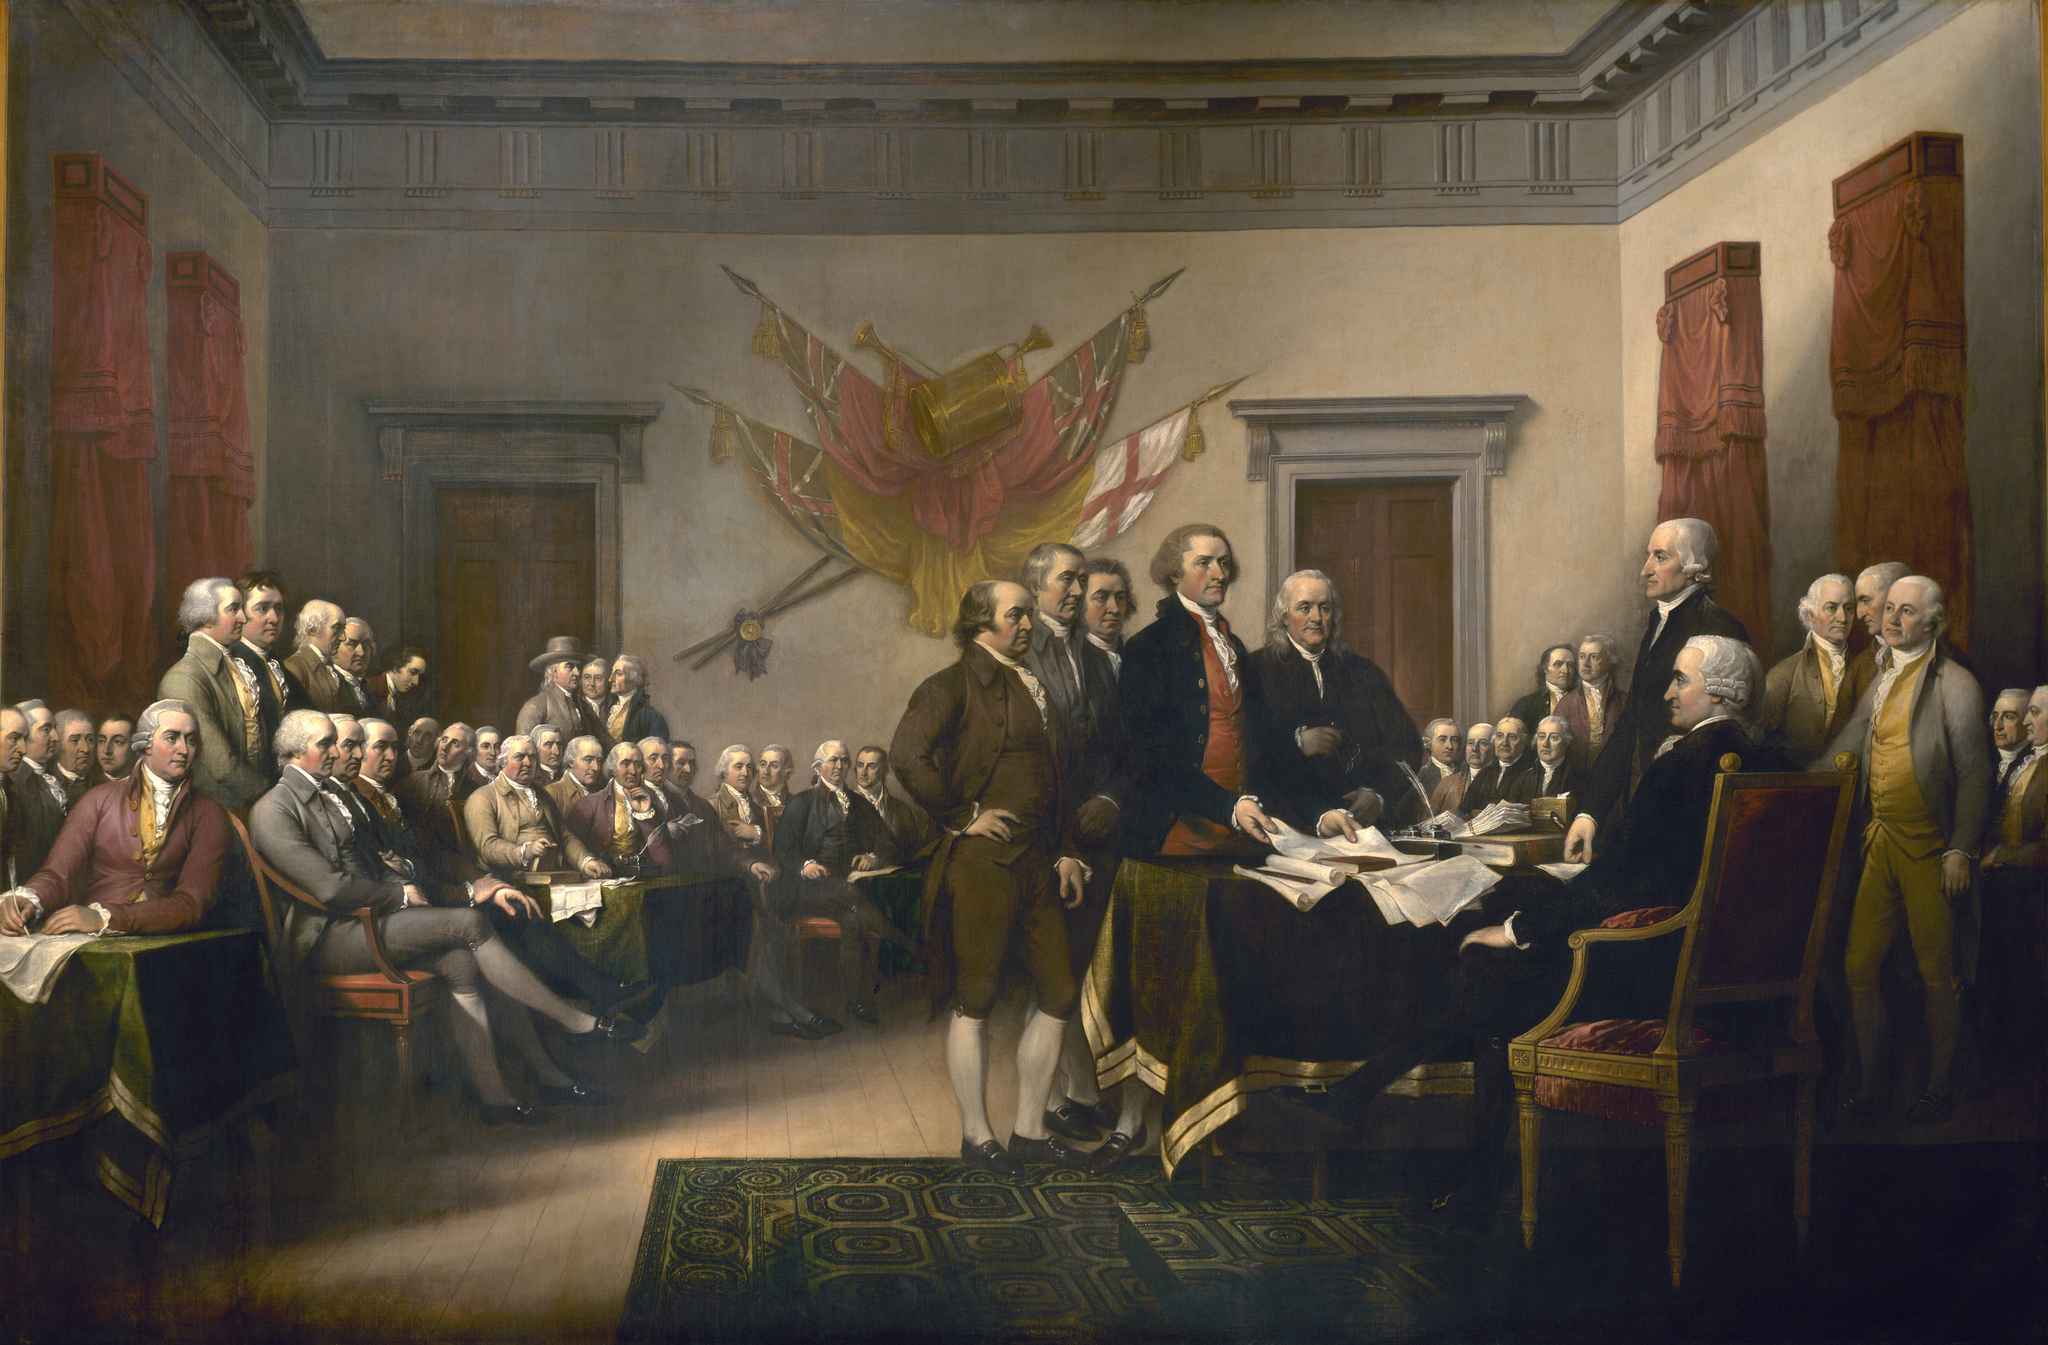 Founding fathers meeting to sign the Declaration of Independence